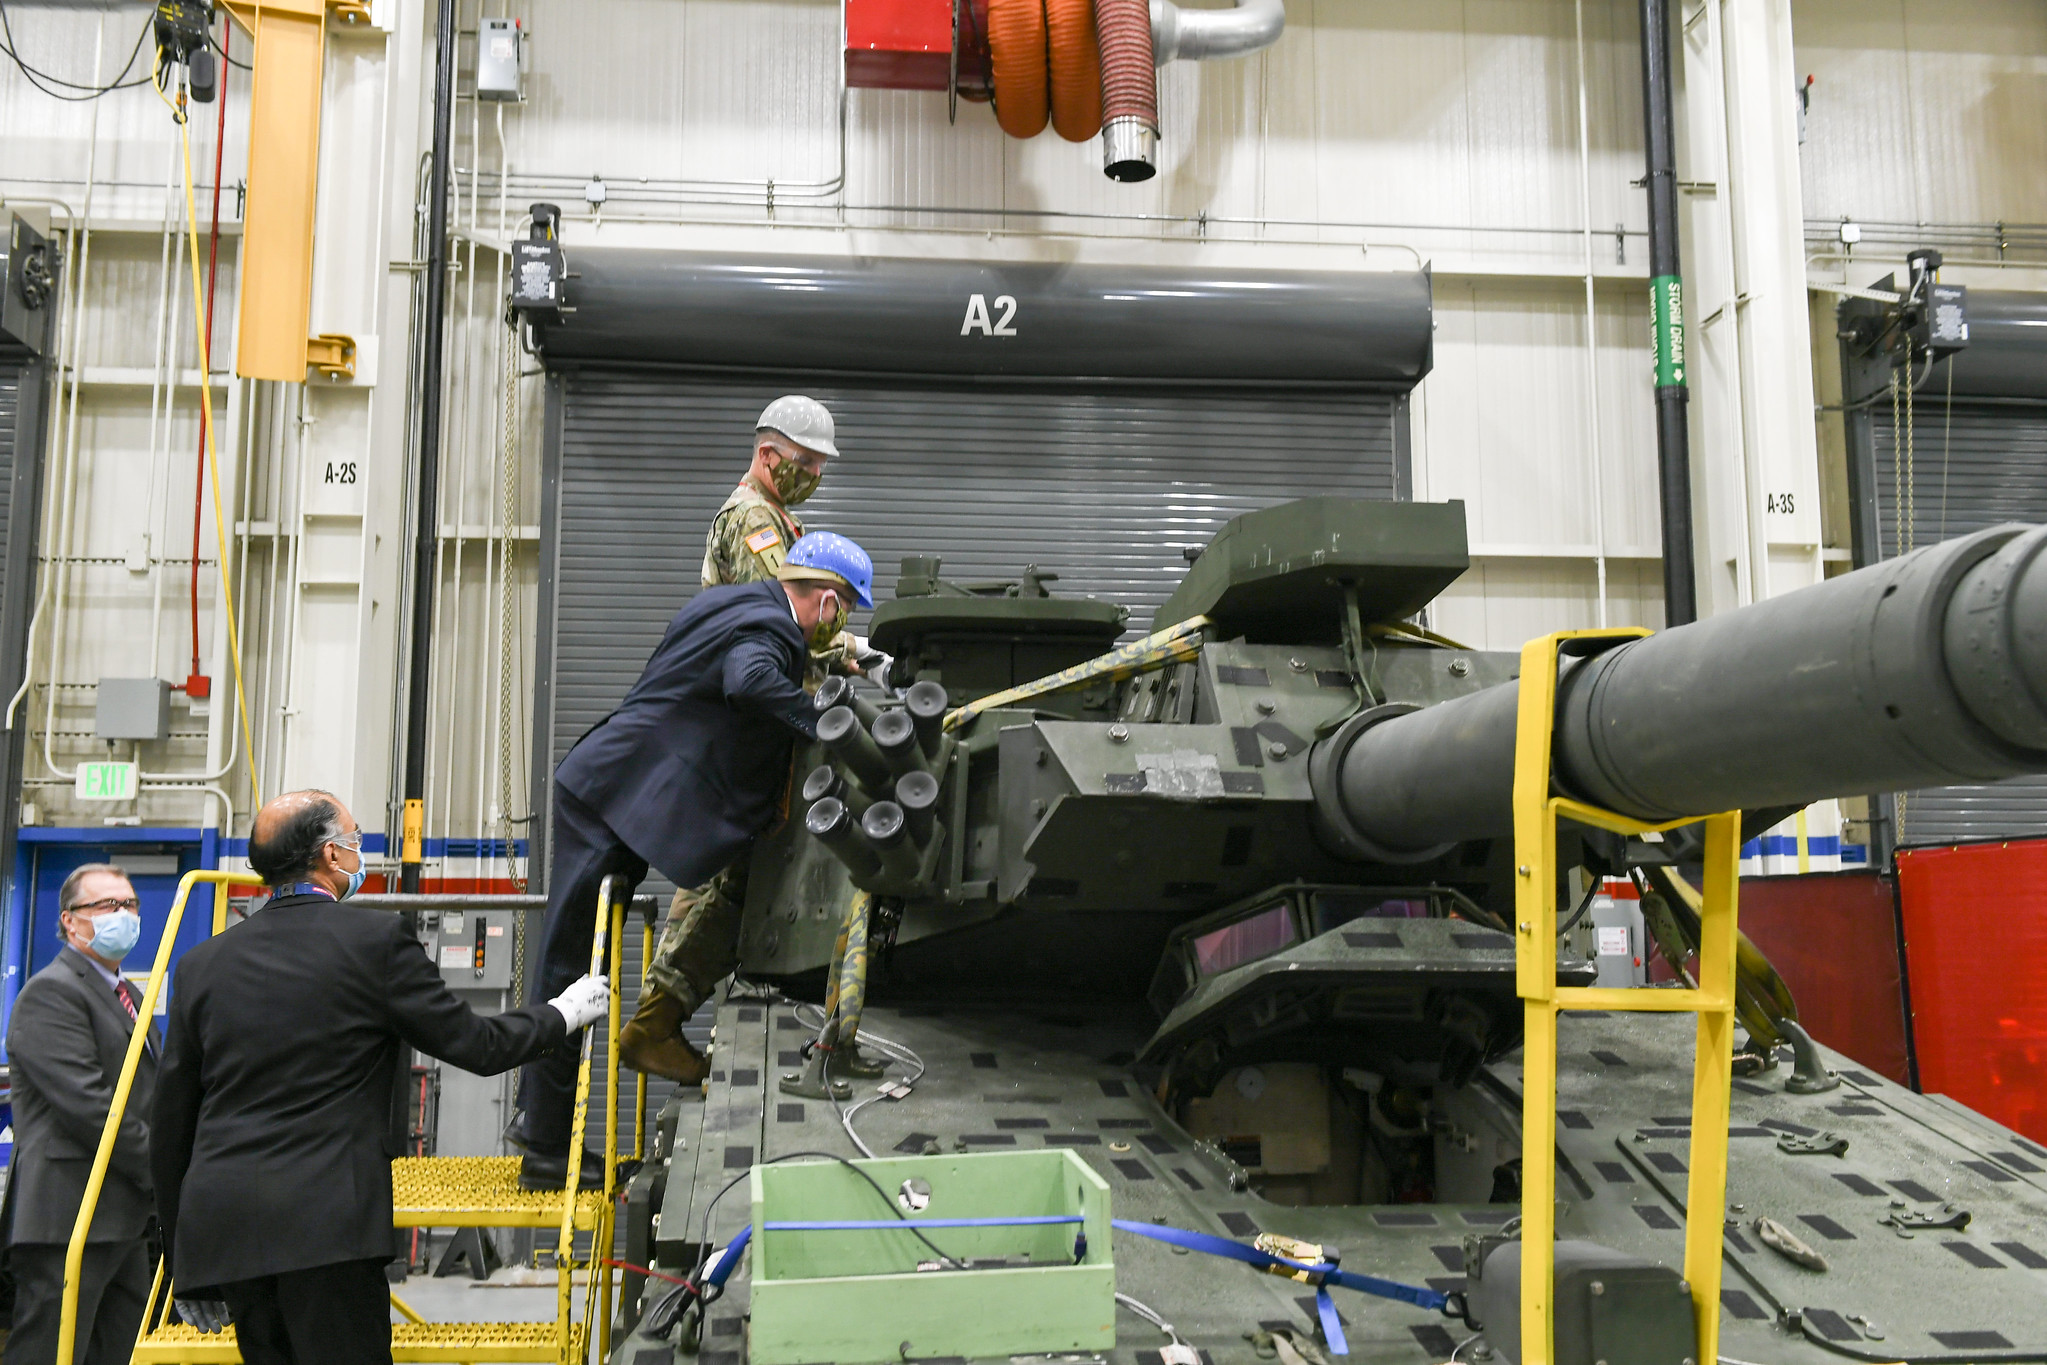 Secretary of the Army, Hon. Ryan D. McCarthy visit BAE Systems and inspect BAE's Mobile Protected Firepower (MPF)